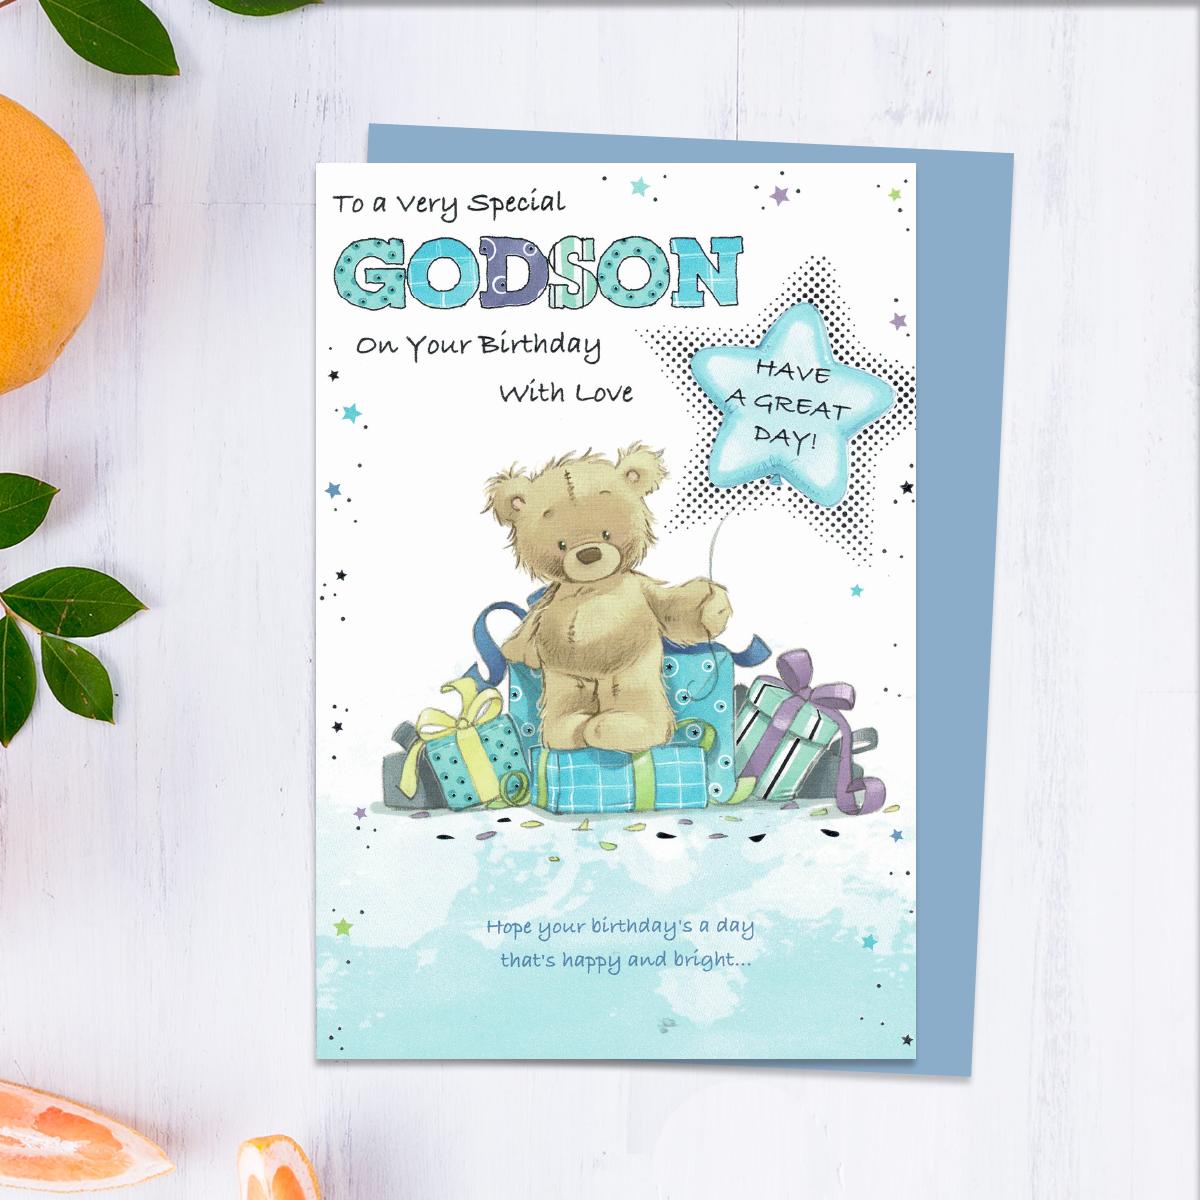 To A Very Special Godson On Your Birthday With Love Card Featuring A Cute Teddy On A Stack of Gifts. With Added Silver Foiled Detail And White Envelope